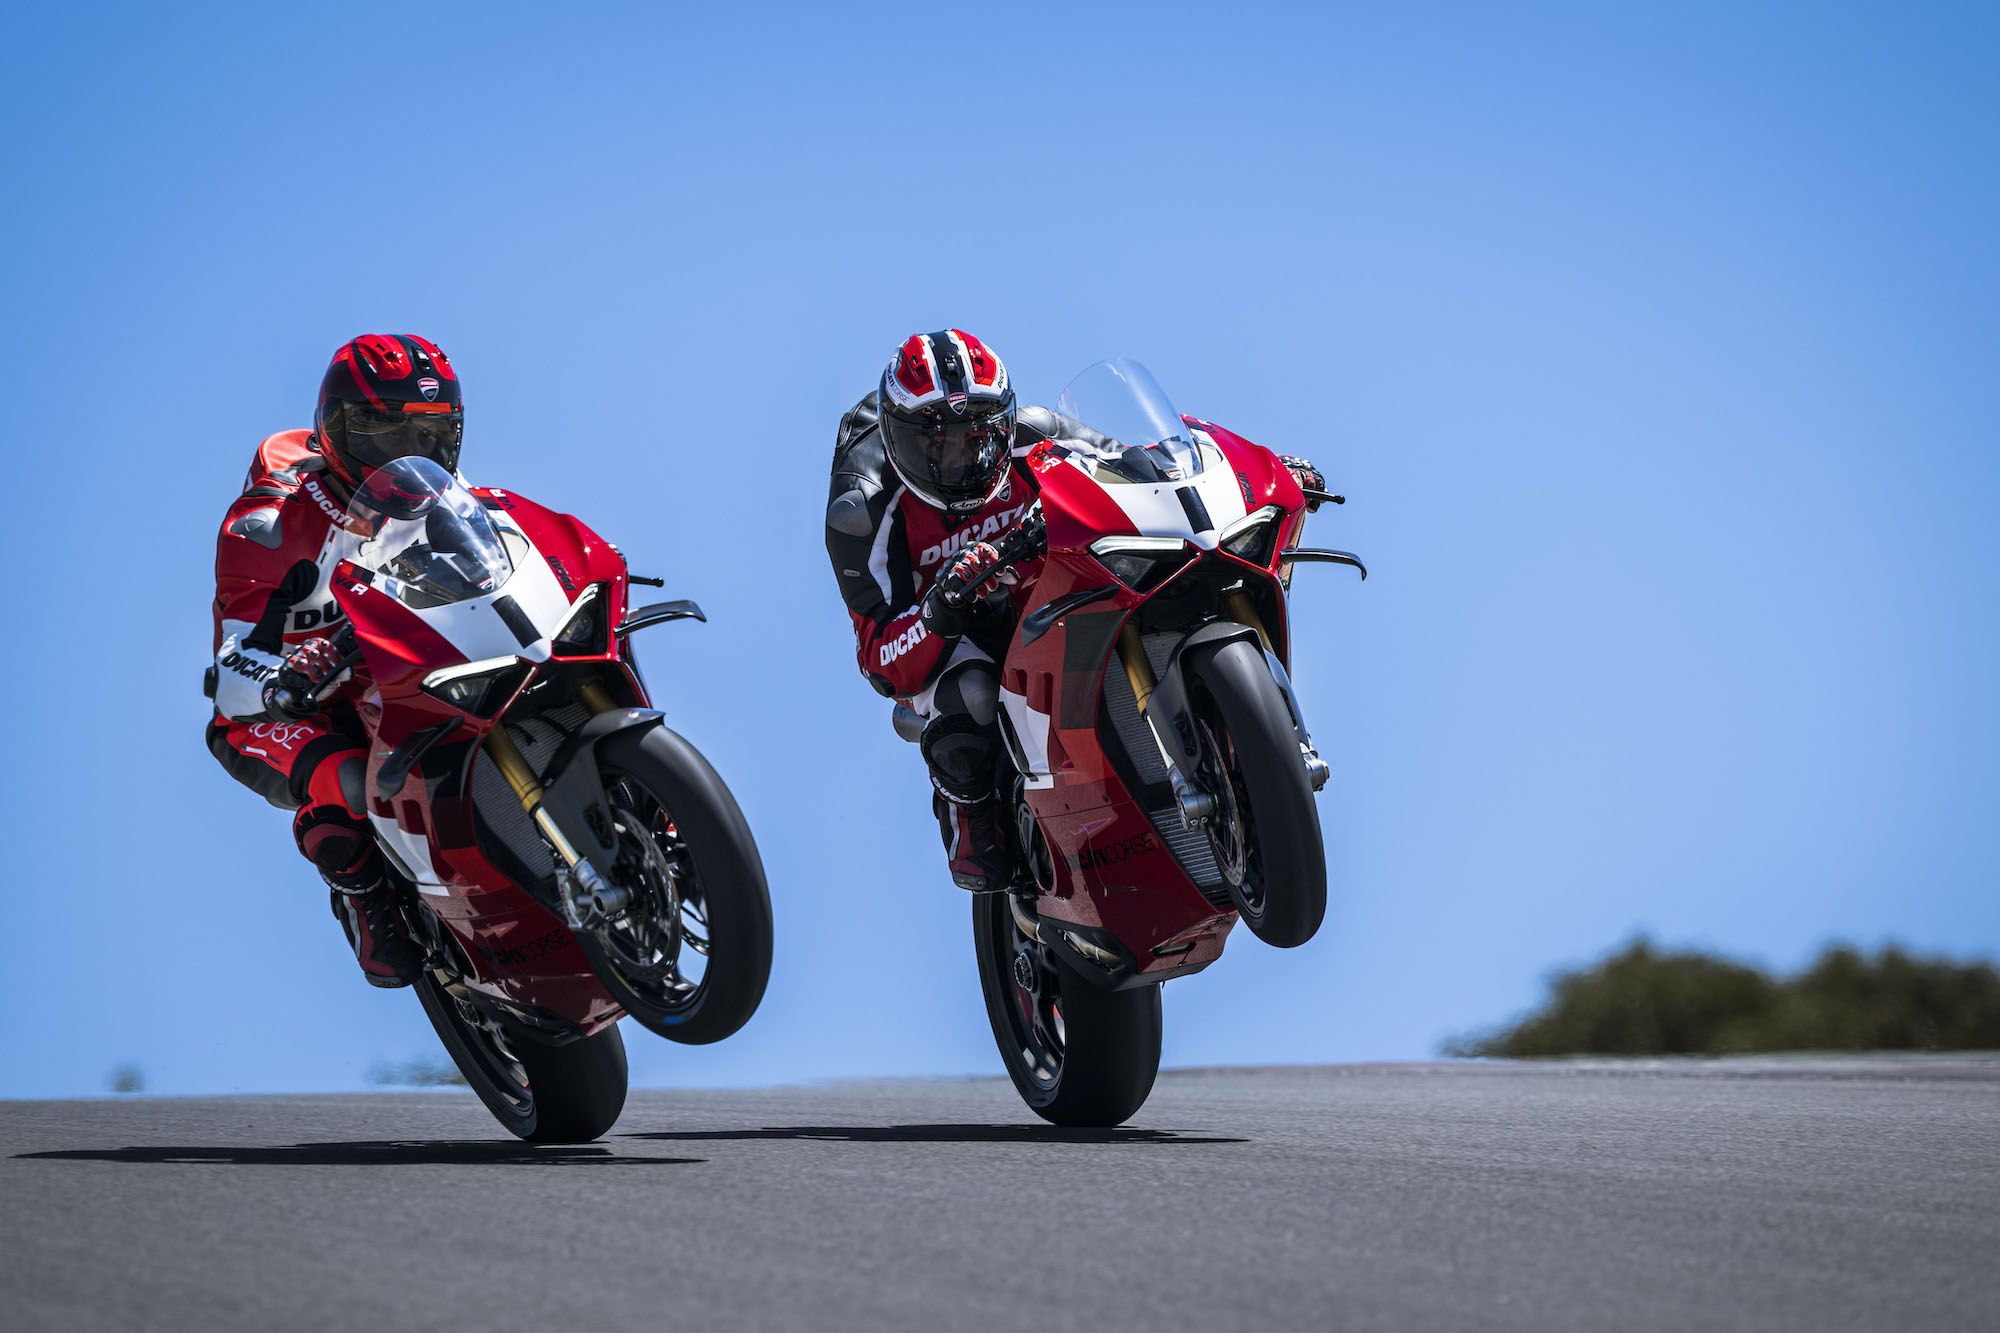 Episode 4 of Ducati's 2023 World Premiere, featuring the all-new Panigale V4 R.